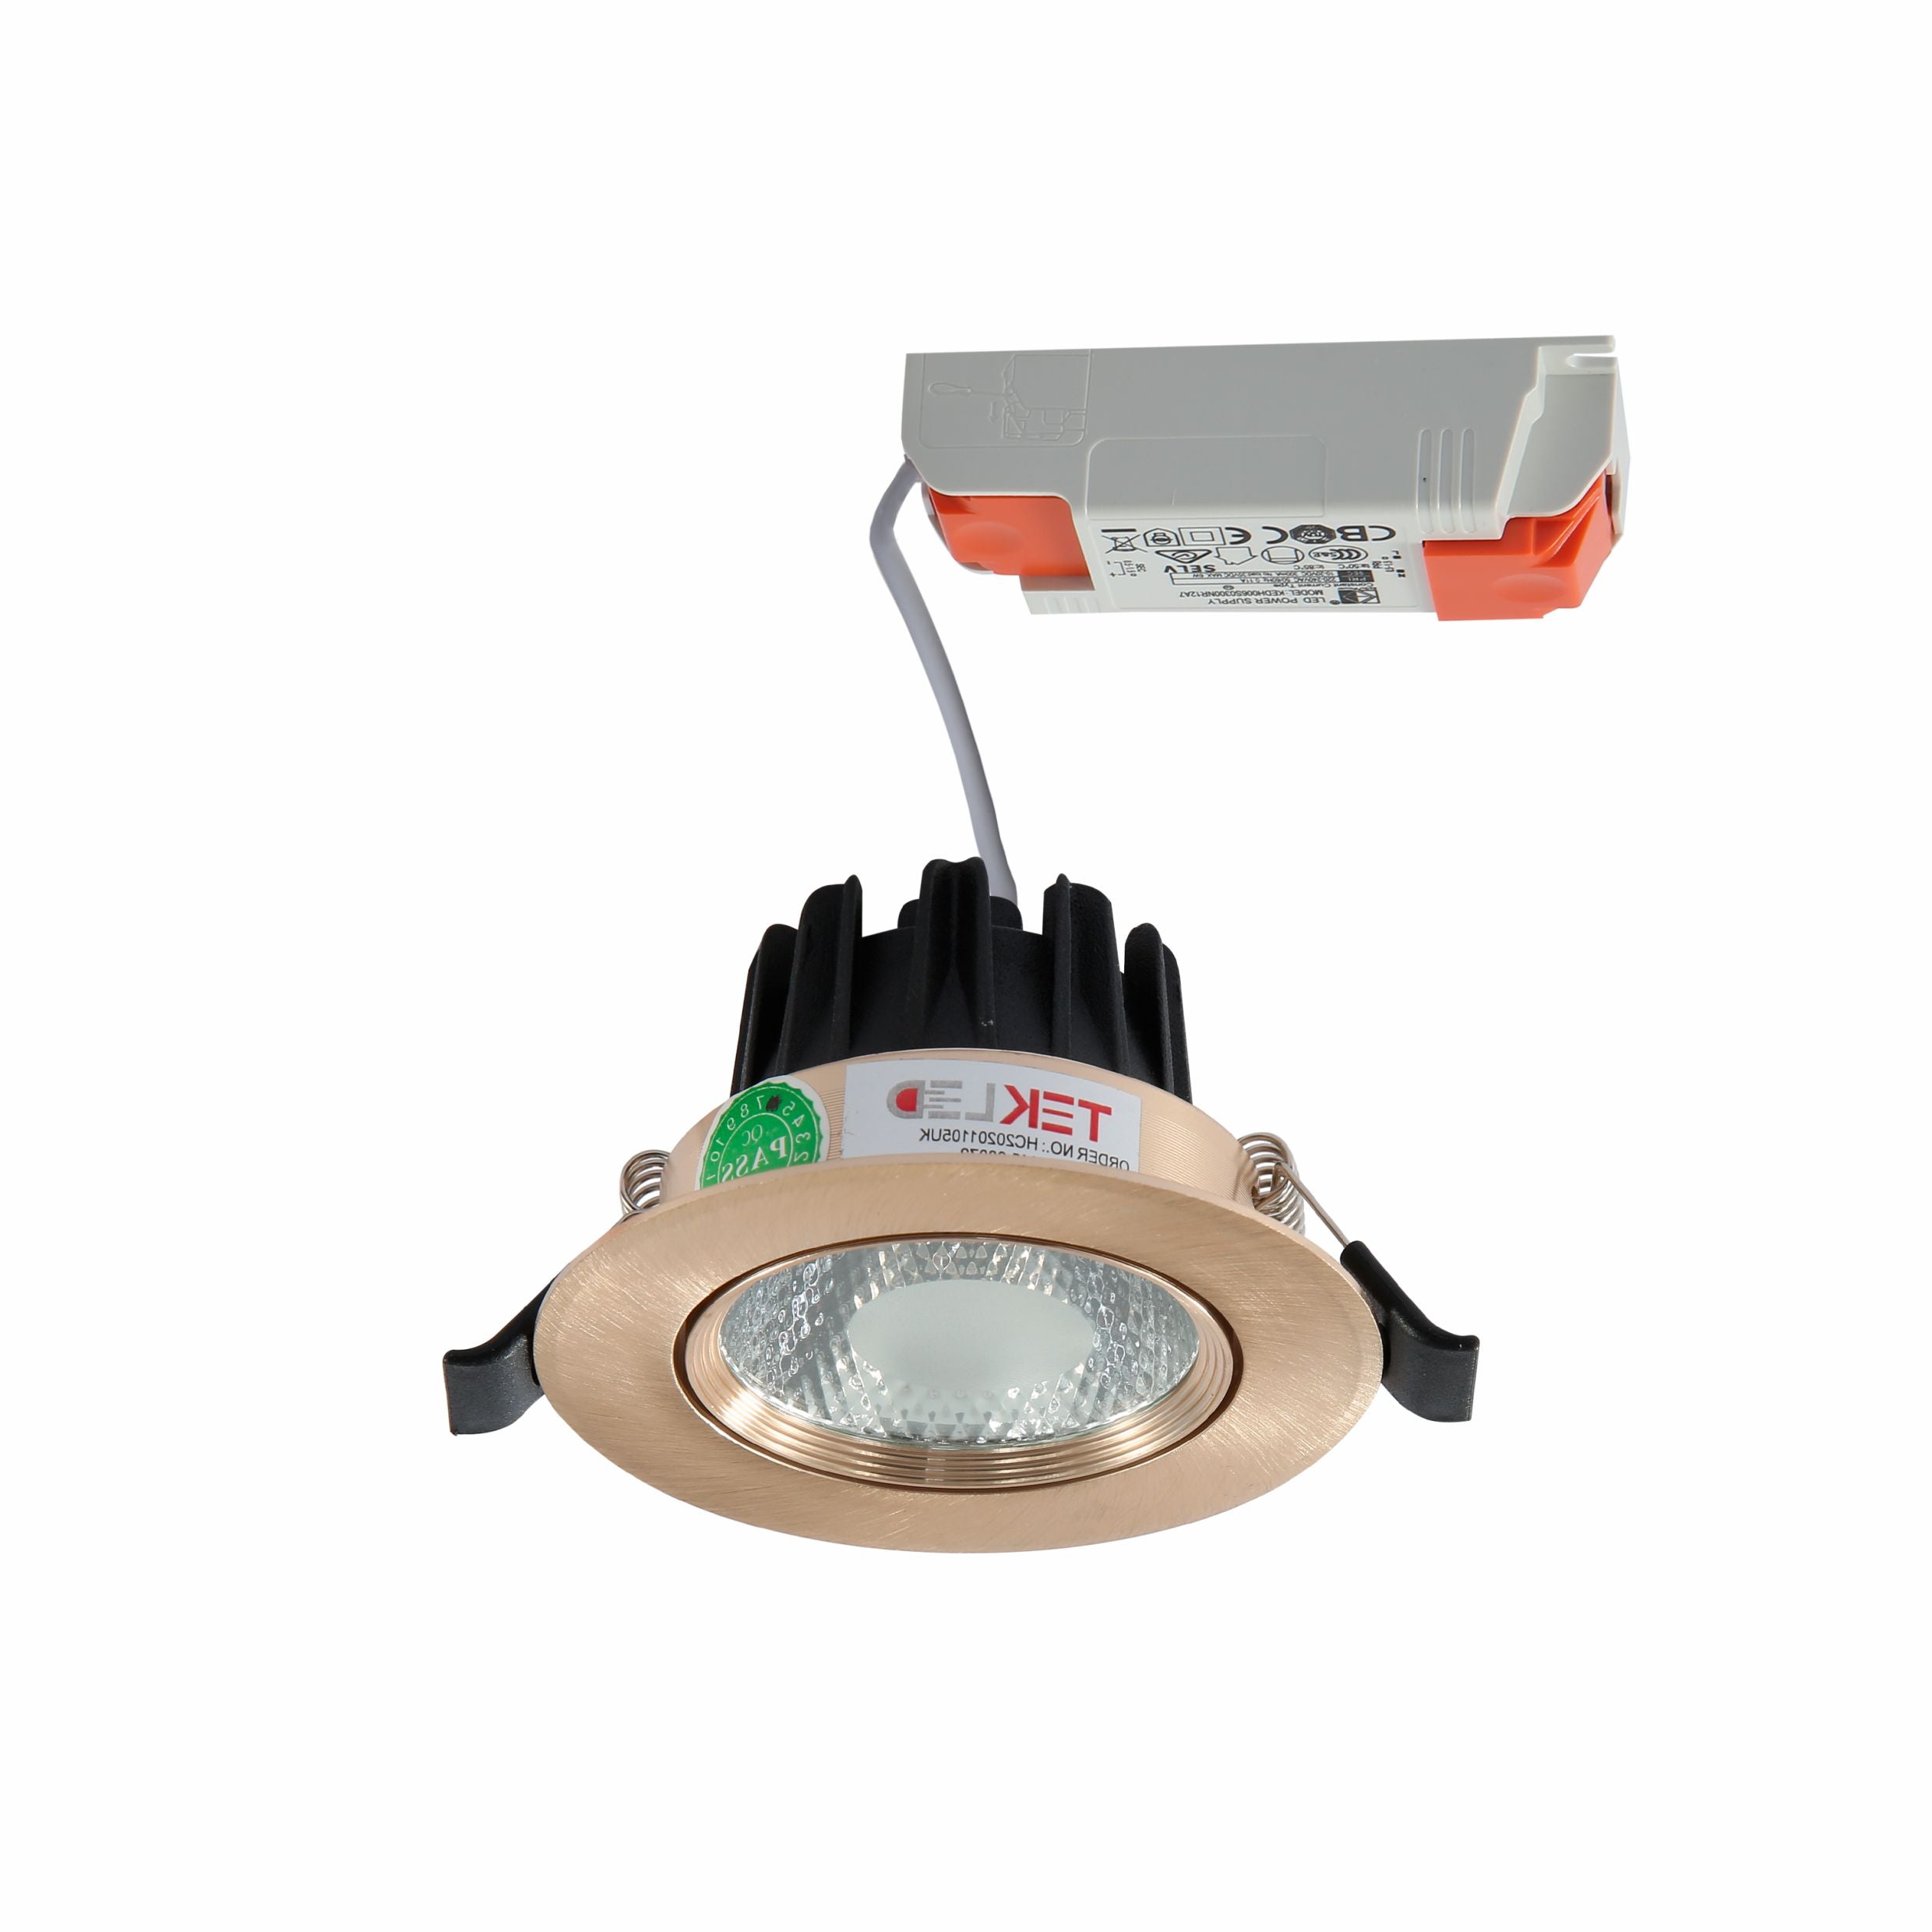 Main image of LED COB Recessed Downlight 5W Cool Daylight 6000K Antique Brass | TEKLED 145-03072